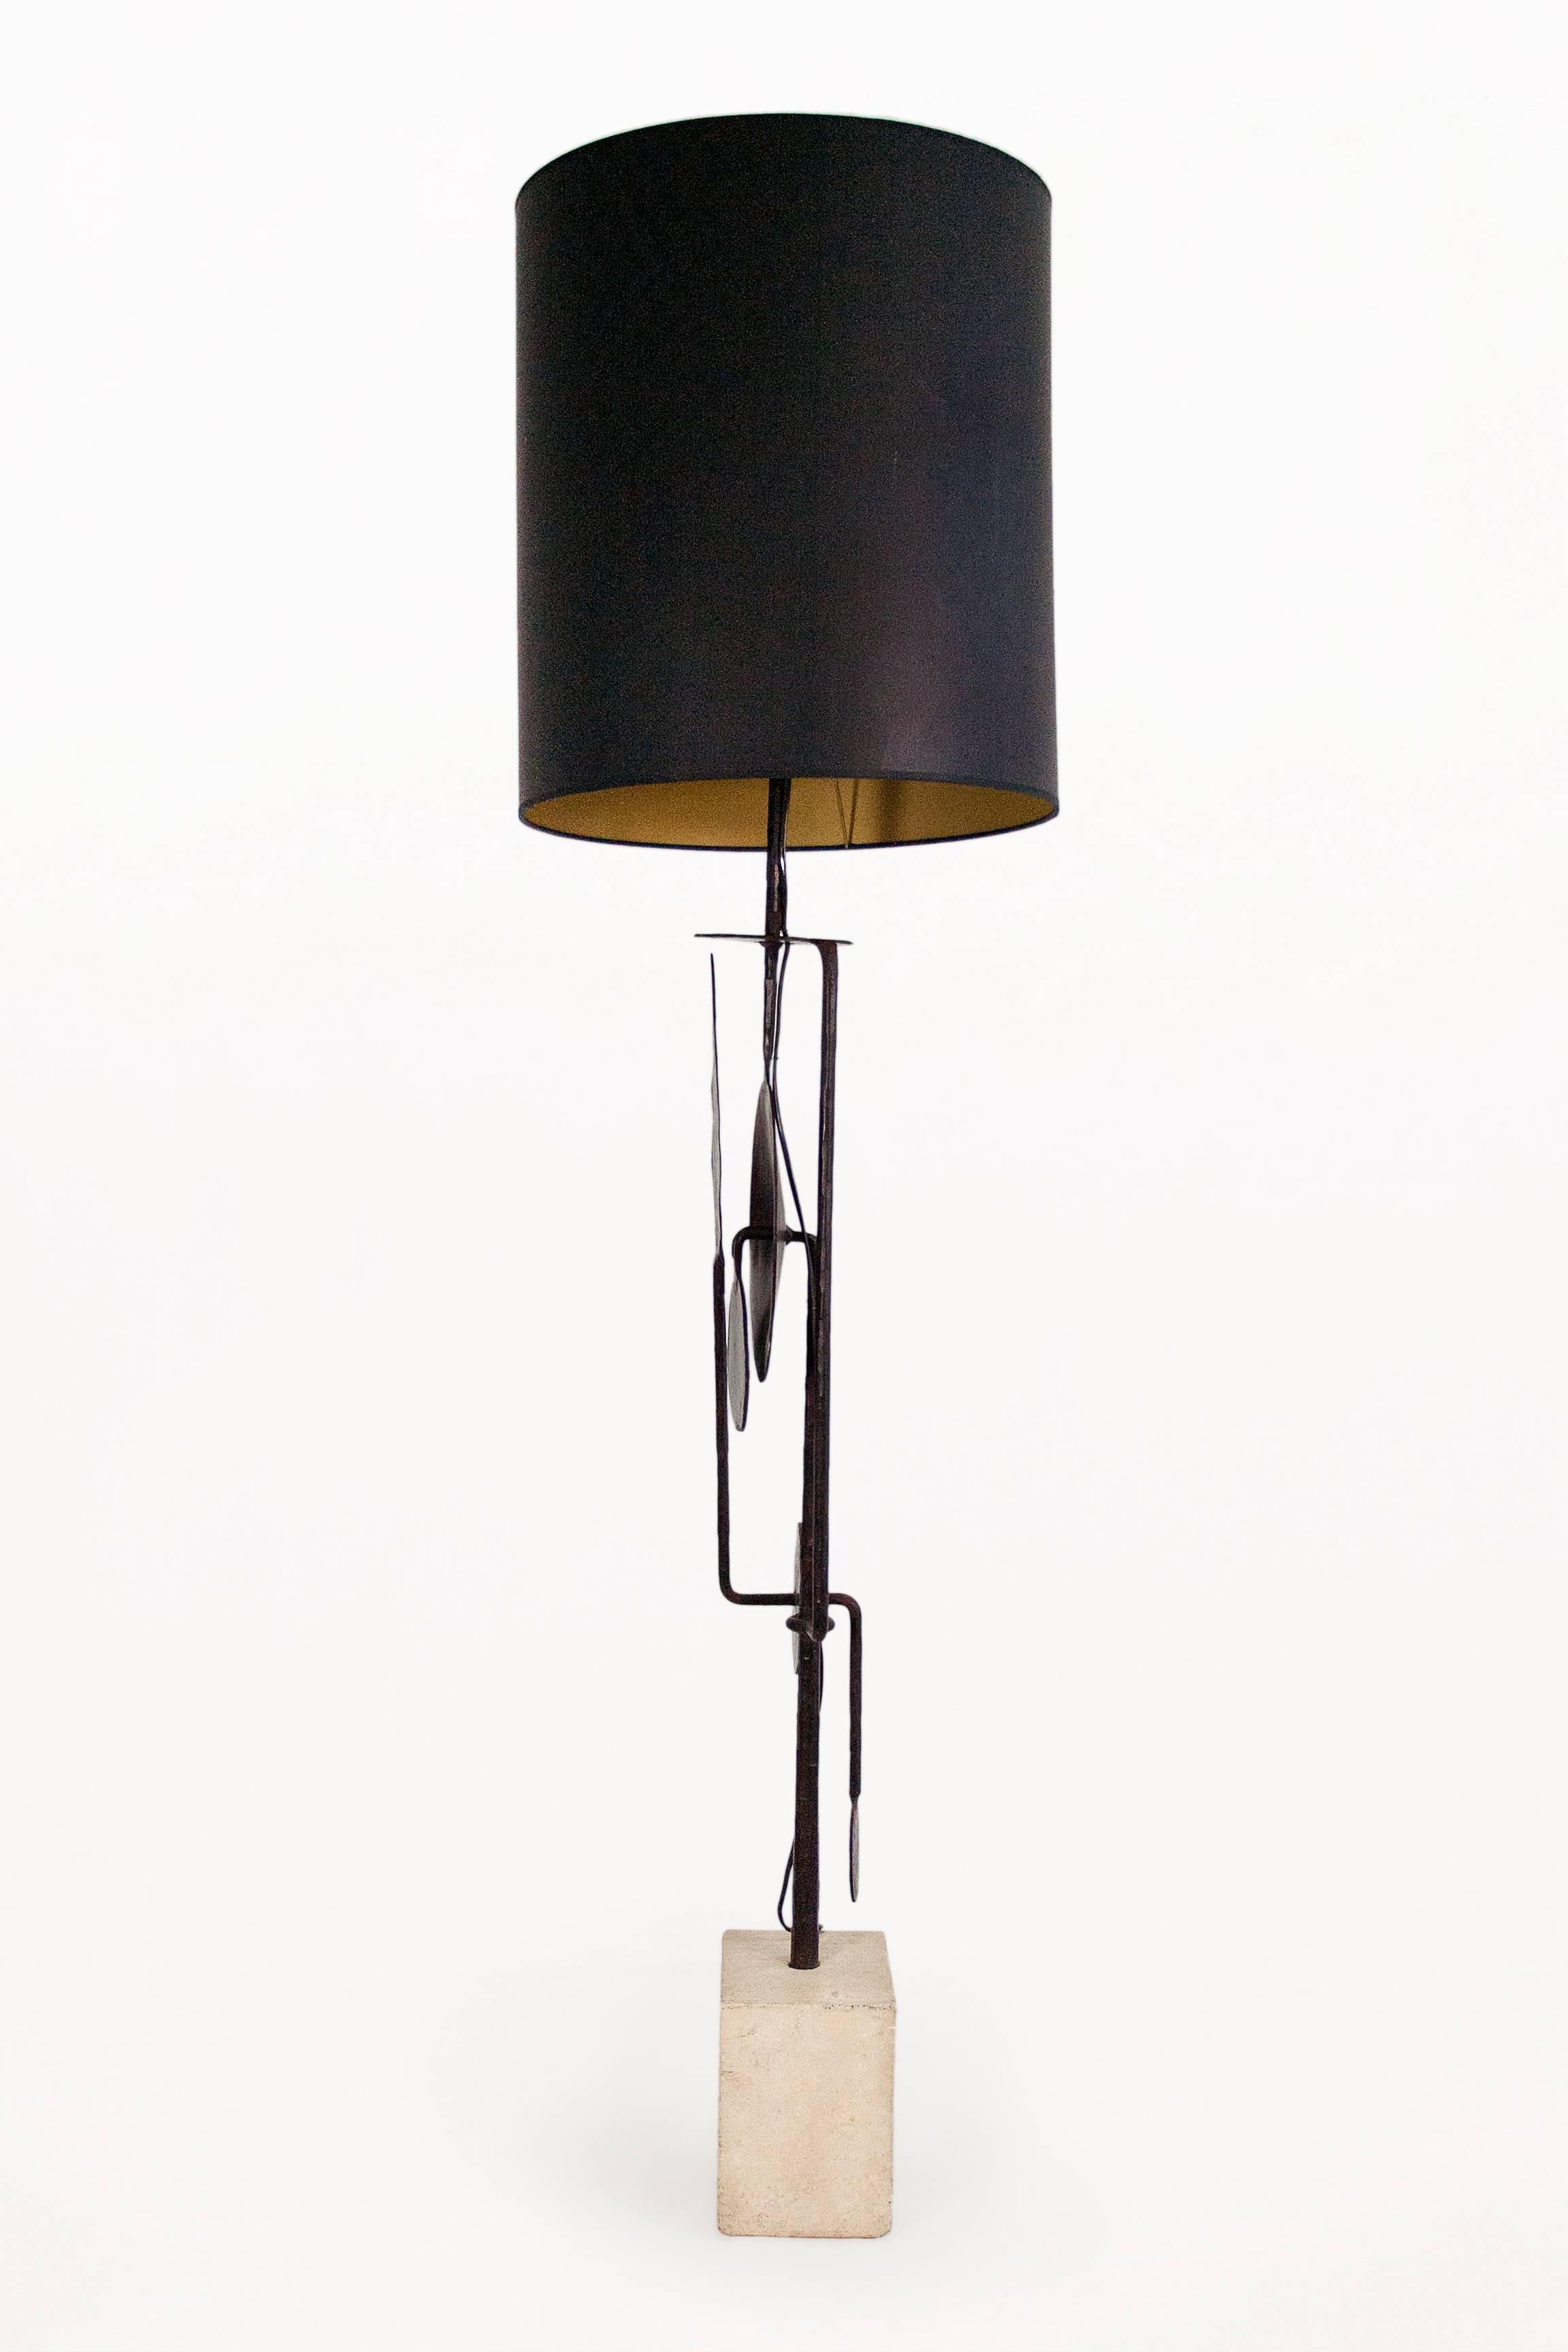 Italian Very Large Sculptural Table Lamp by Giovanni Banci, circa 1970, Italy